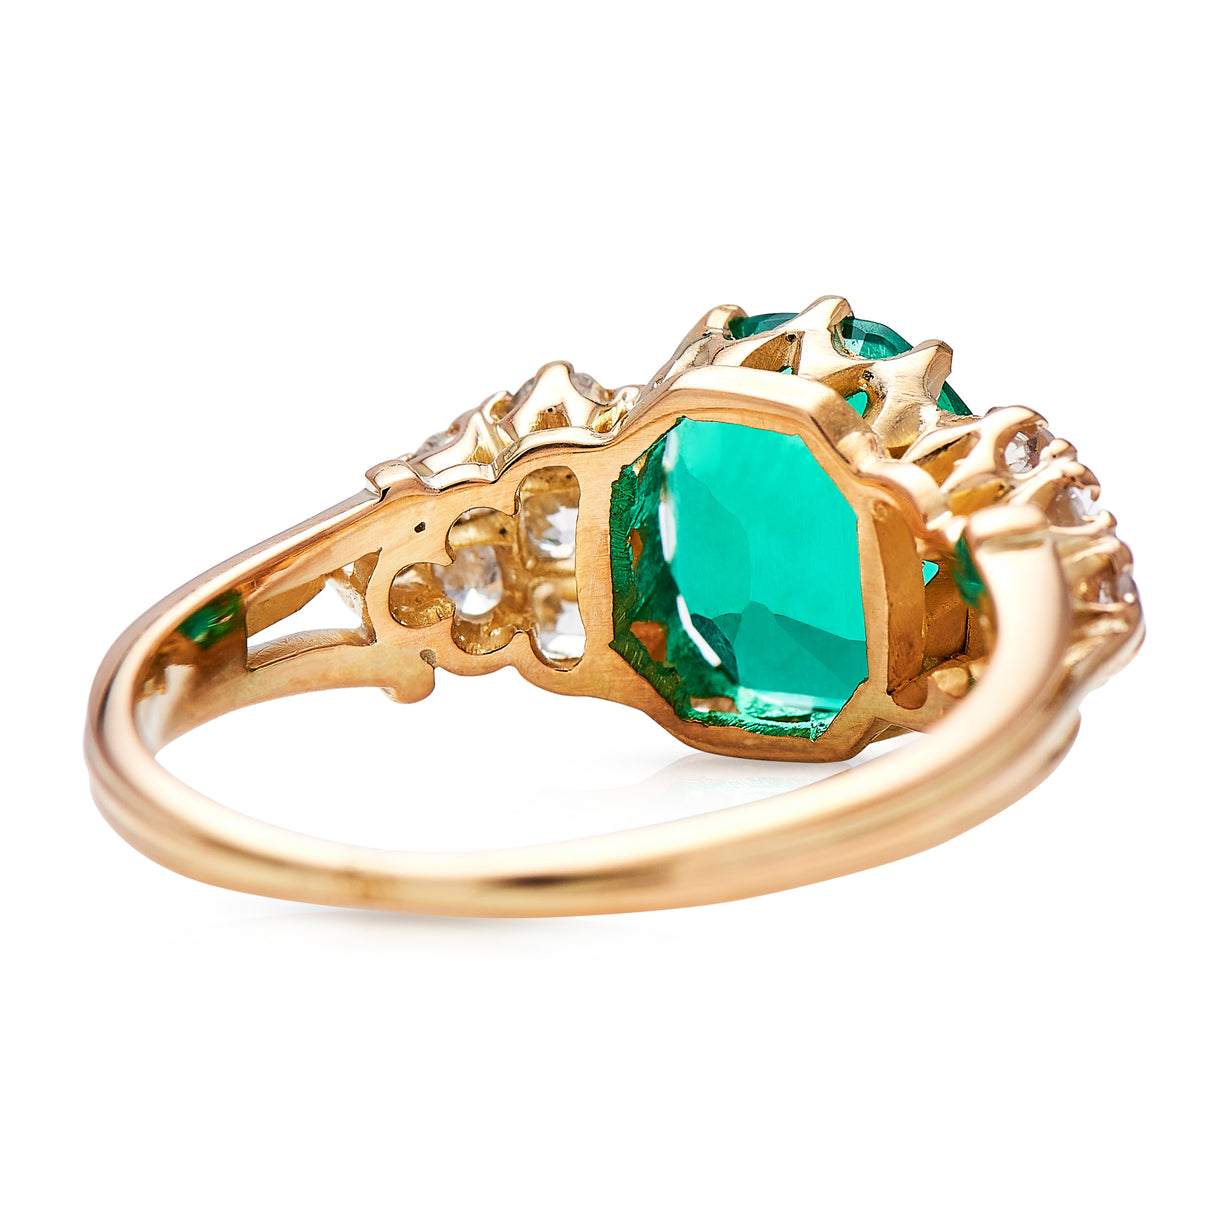 Antique_Emerald_Engagement_Rings | Vintage_Rings | Vintage_Engagement_Rings